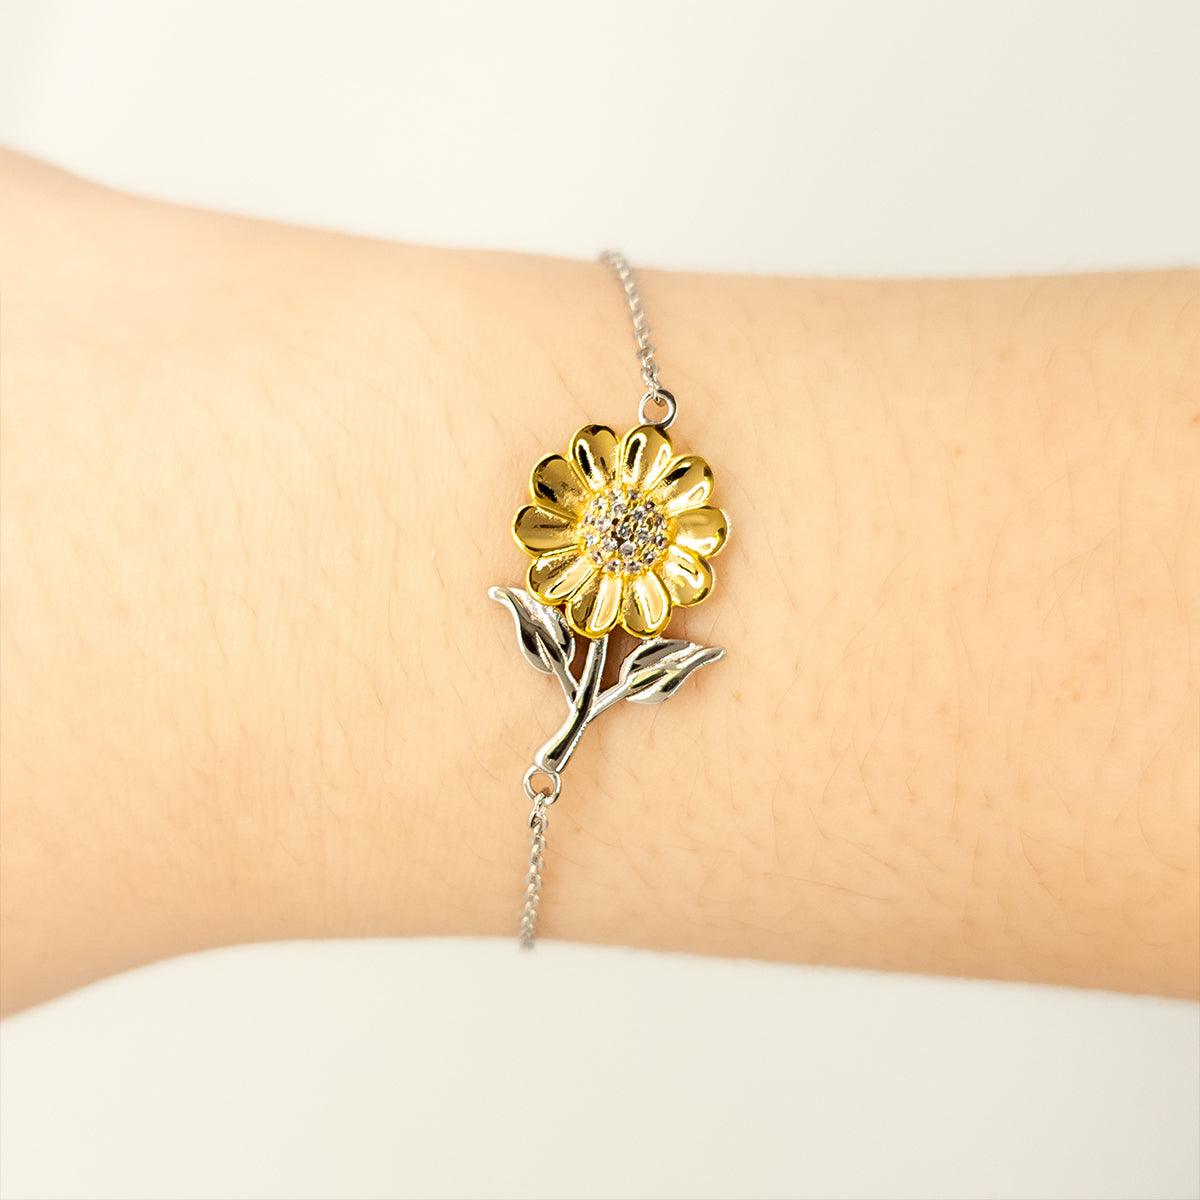 Sarcastic Pharmacy Technician Sunflower Bracelet Gifts, Christmas Holiday Gifts for Pharmacy Technician Birthday Message Card, Pharmacy Technician: Because greatness is woven into the fabric of every day, Coworkers, Friends - Mallard Moon Gift Shop